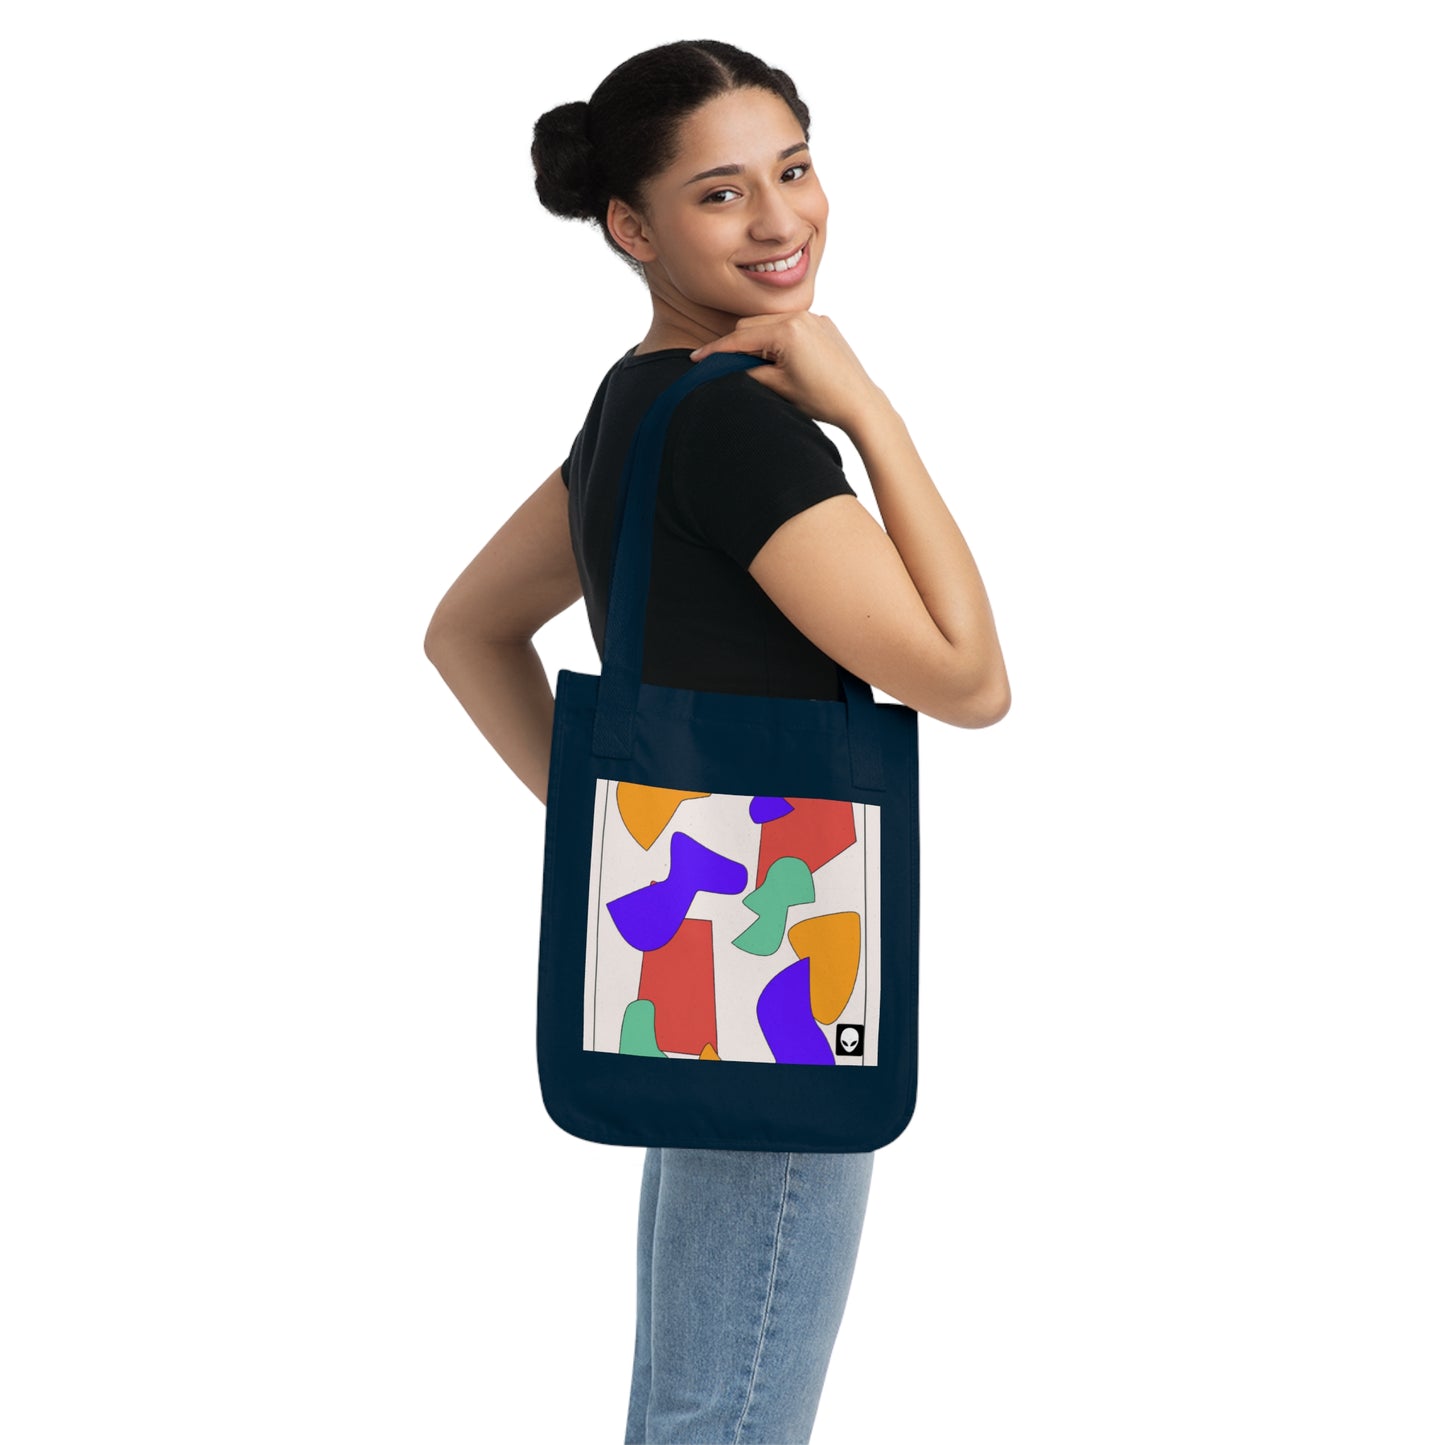 "A Beacon of Hope" - The Alien Eco-friendly Tote Bag